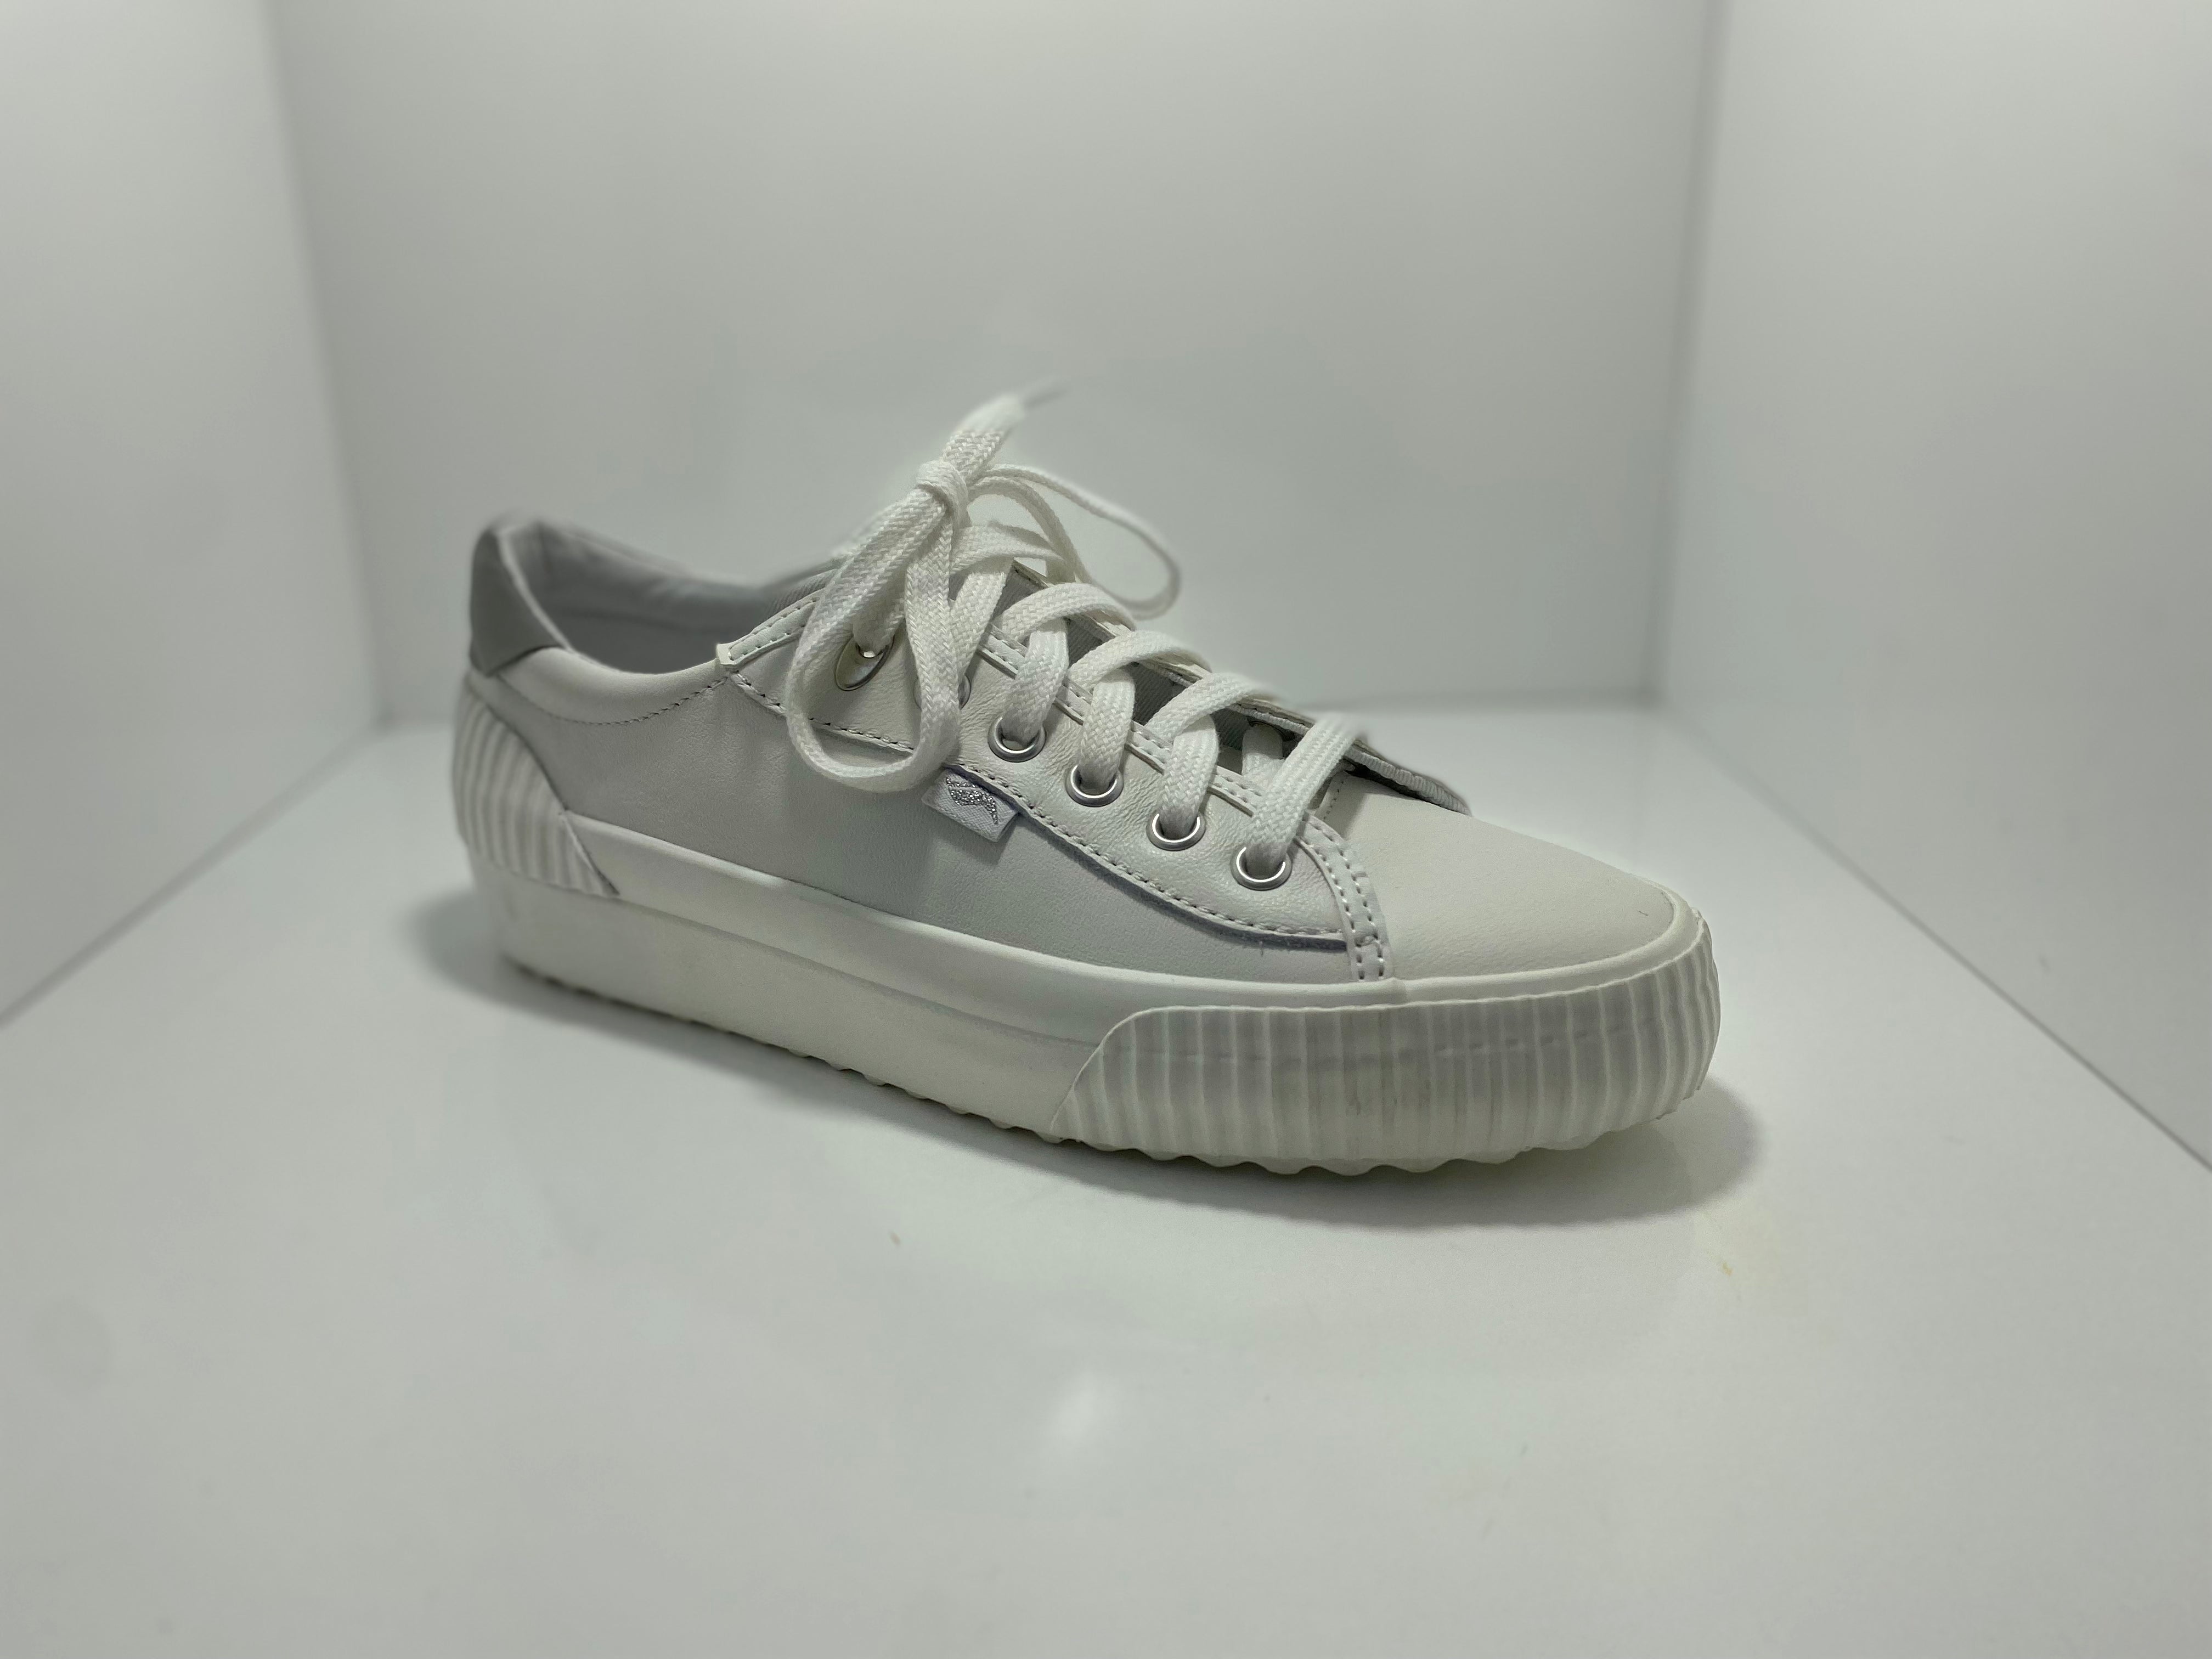 Keds Demi Trx Leather Sneaker White/Silver WH606016